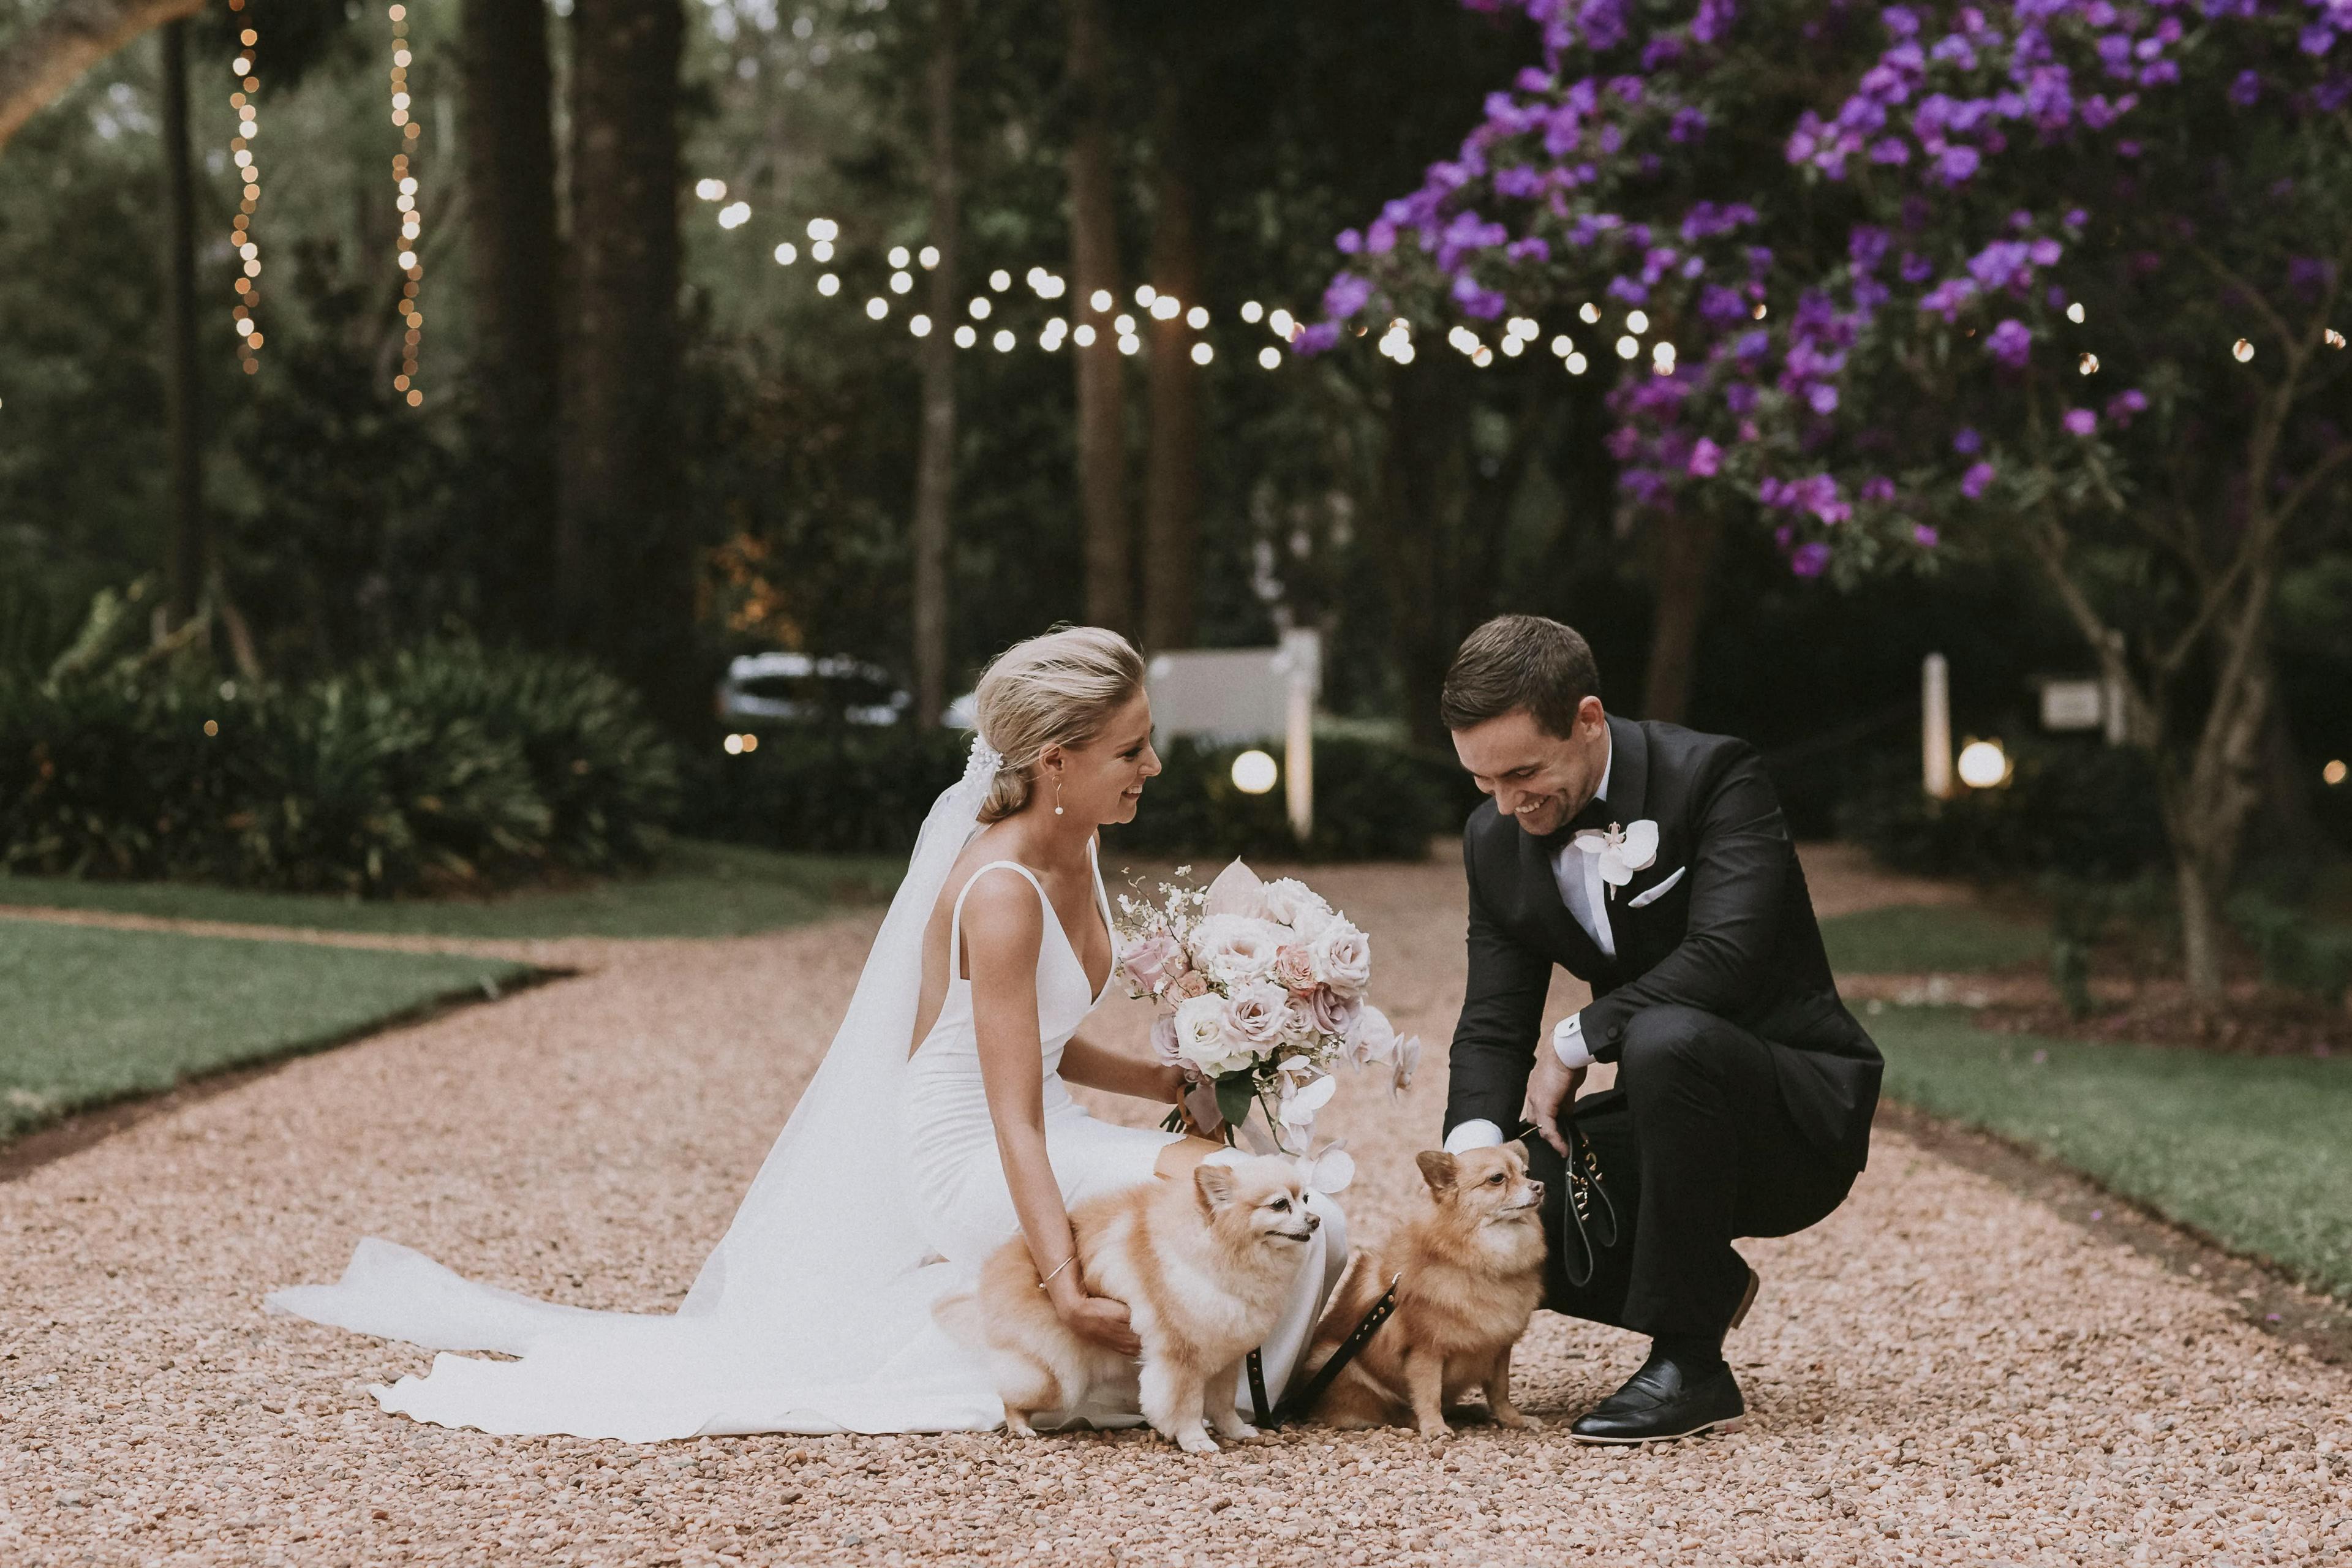 A bride in a white gown with a veil and a groom in a black tuxedo pose with two small dogs on a gravel path lined with trees and fairy lights. The bride holds a bouquet of pink flowers, and both are smiling at the dogs. A purple flowering tree is in the background.